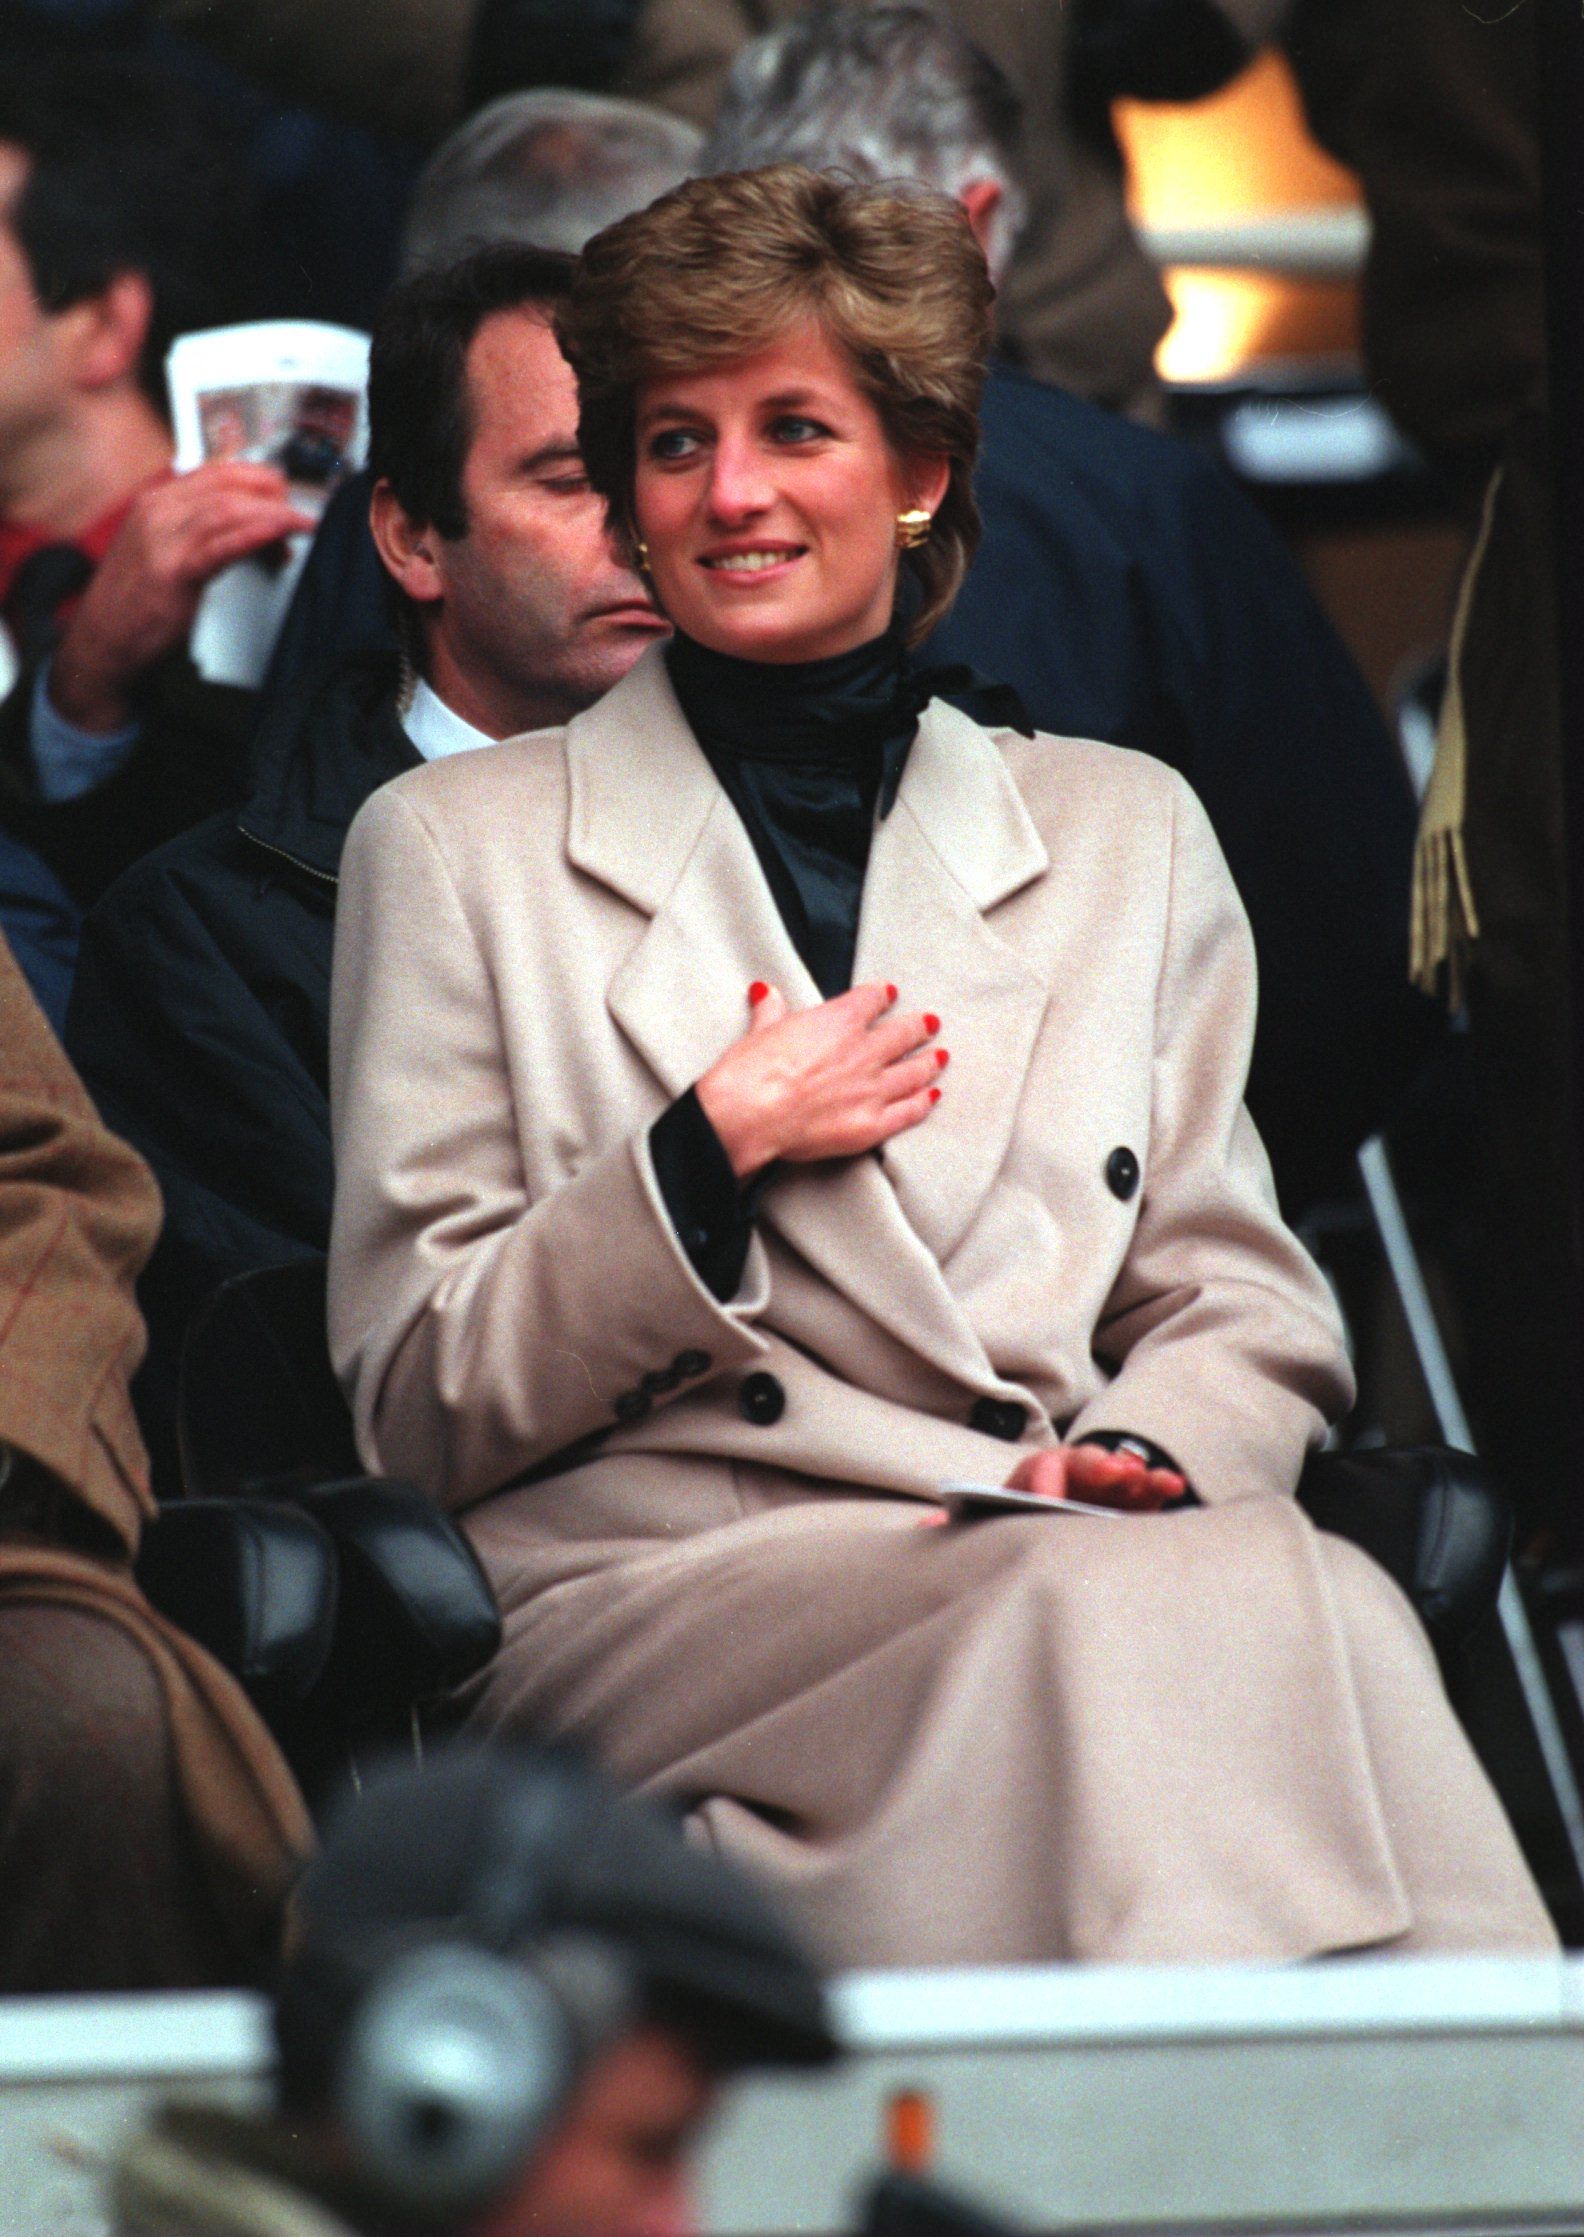 Princess Diana watching the Welsh Rugby Union team during the first five nations match of the season against France on January 21, 1995, at Parc Des Princes in Paris | Photo: Pascal Rondeau/ALLSPORT/Getty Images